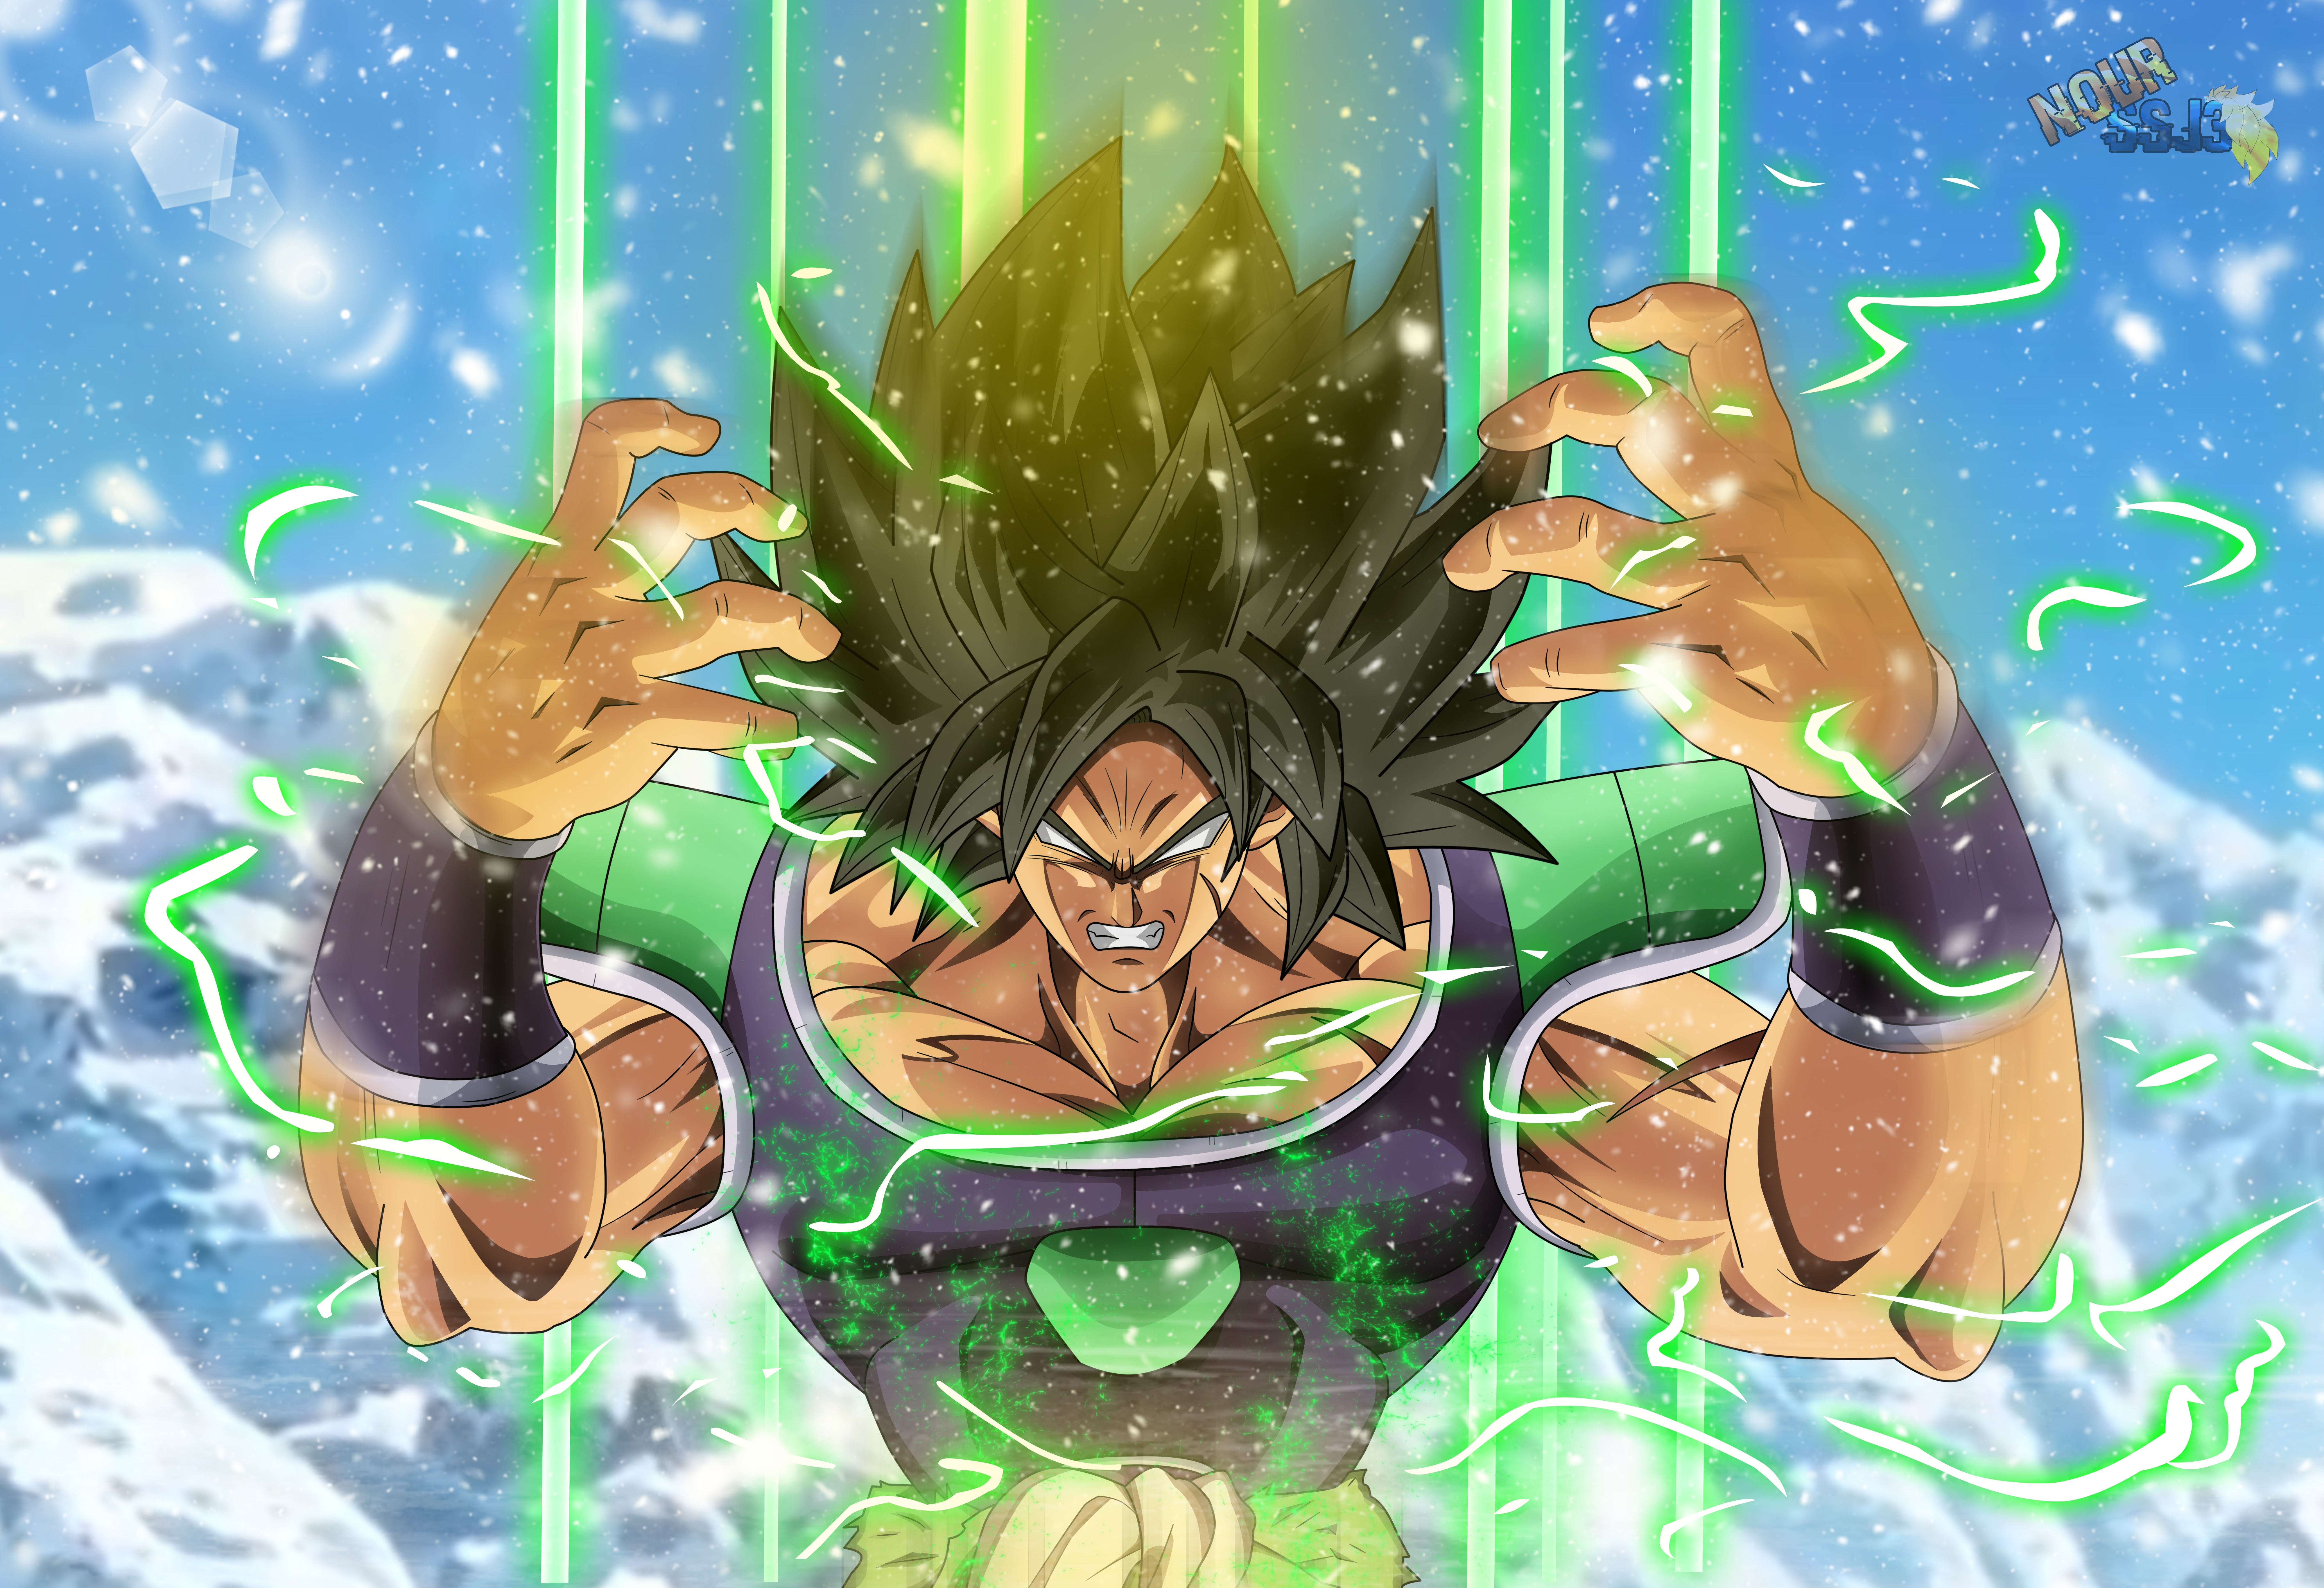 Popular Dragon Ball Super: Broly Image for Phone